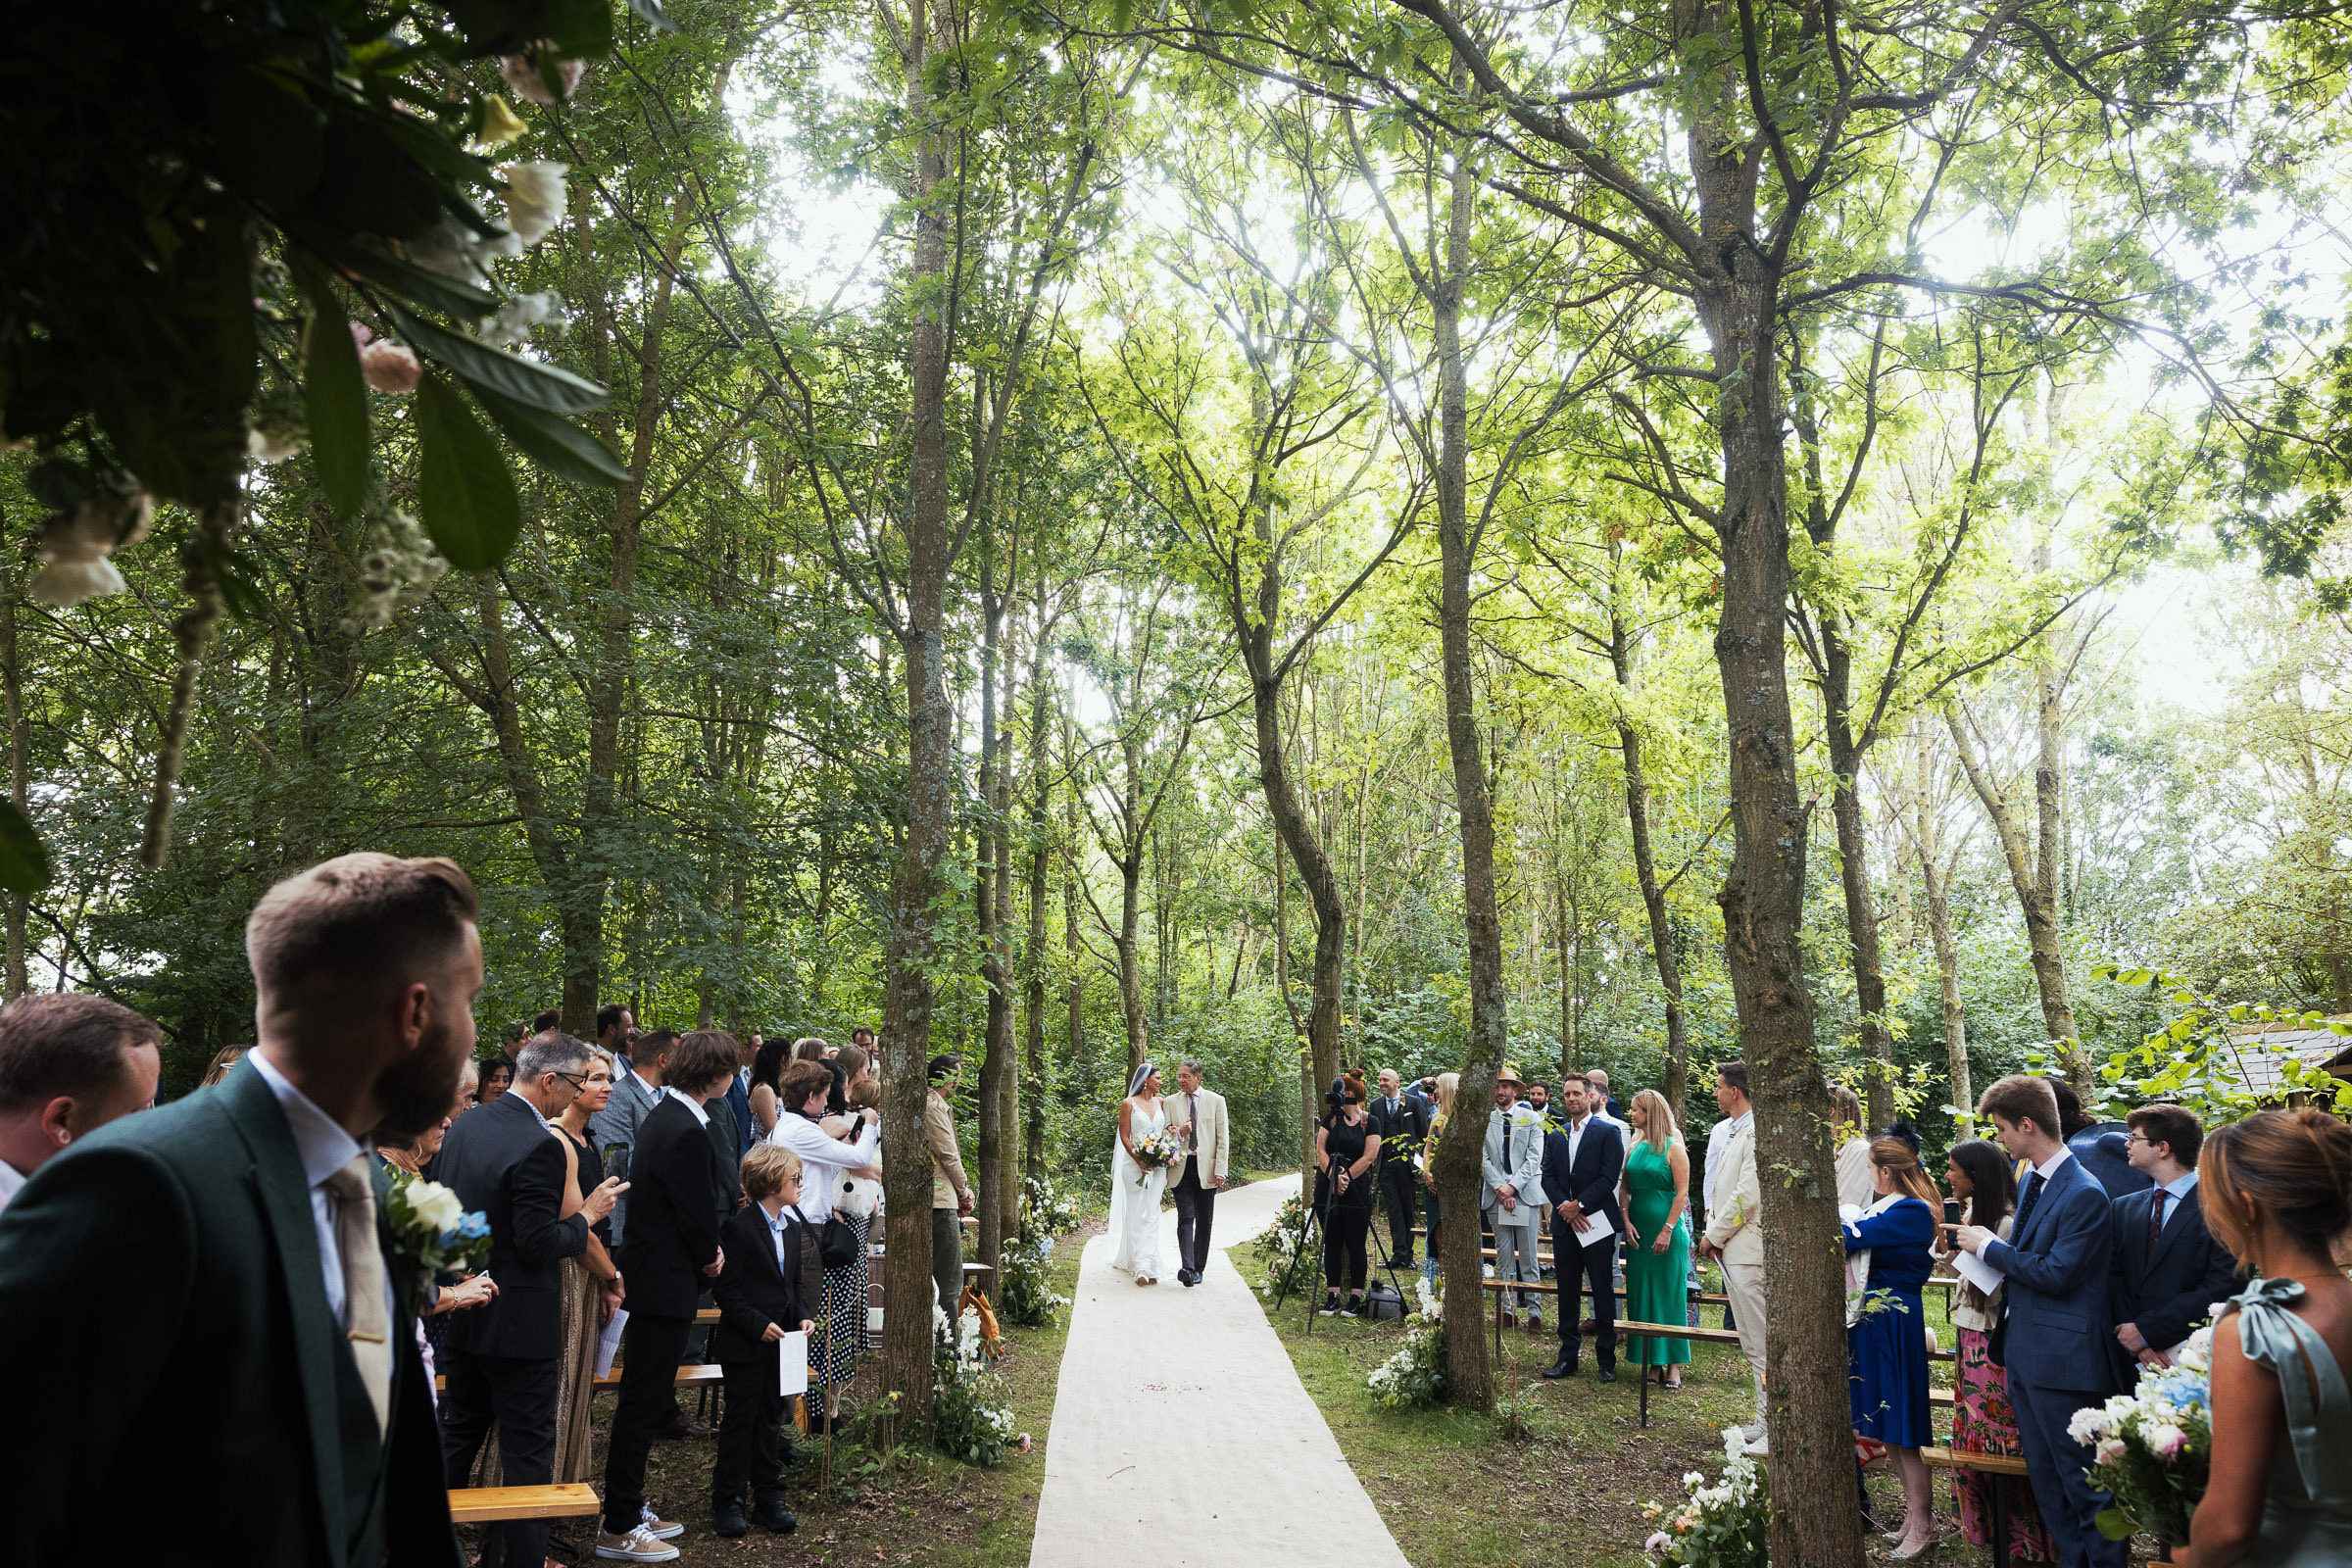 Bride walking down the aisle with her father before a woodland ceremony outside at Alpheton Hall Barns in Suffolk. Surrounded by trees. Bride is wearing Maggie Sottero-Baxley 22MW548B01.